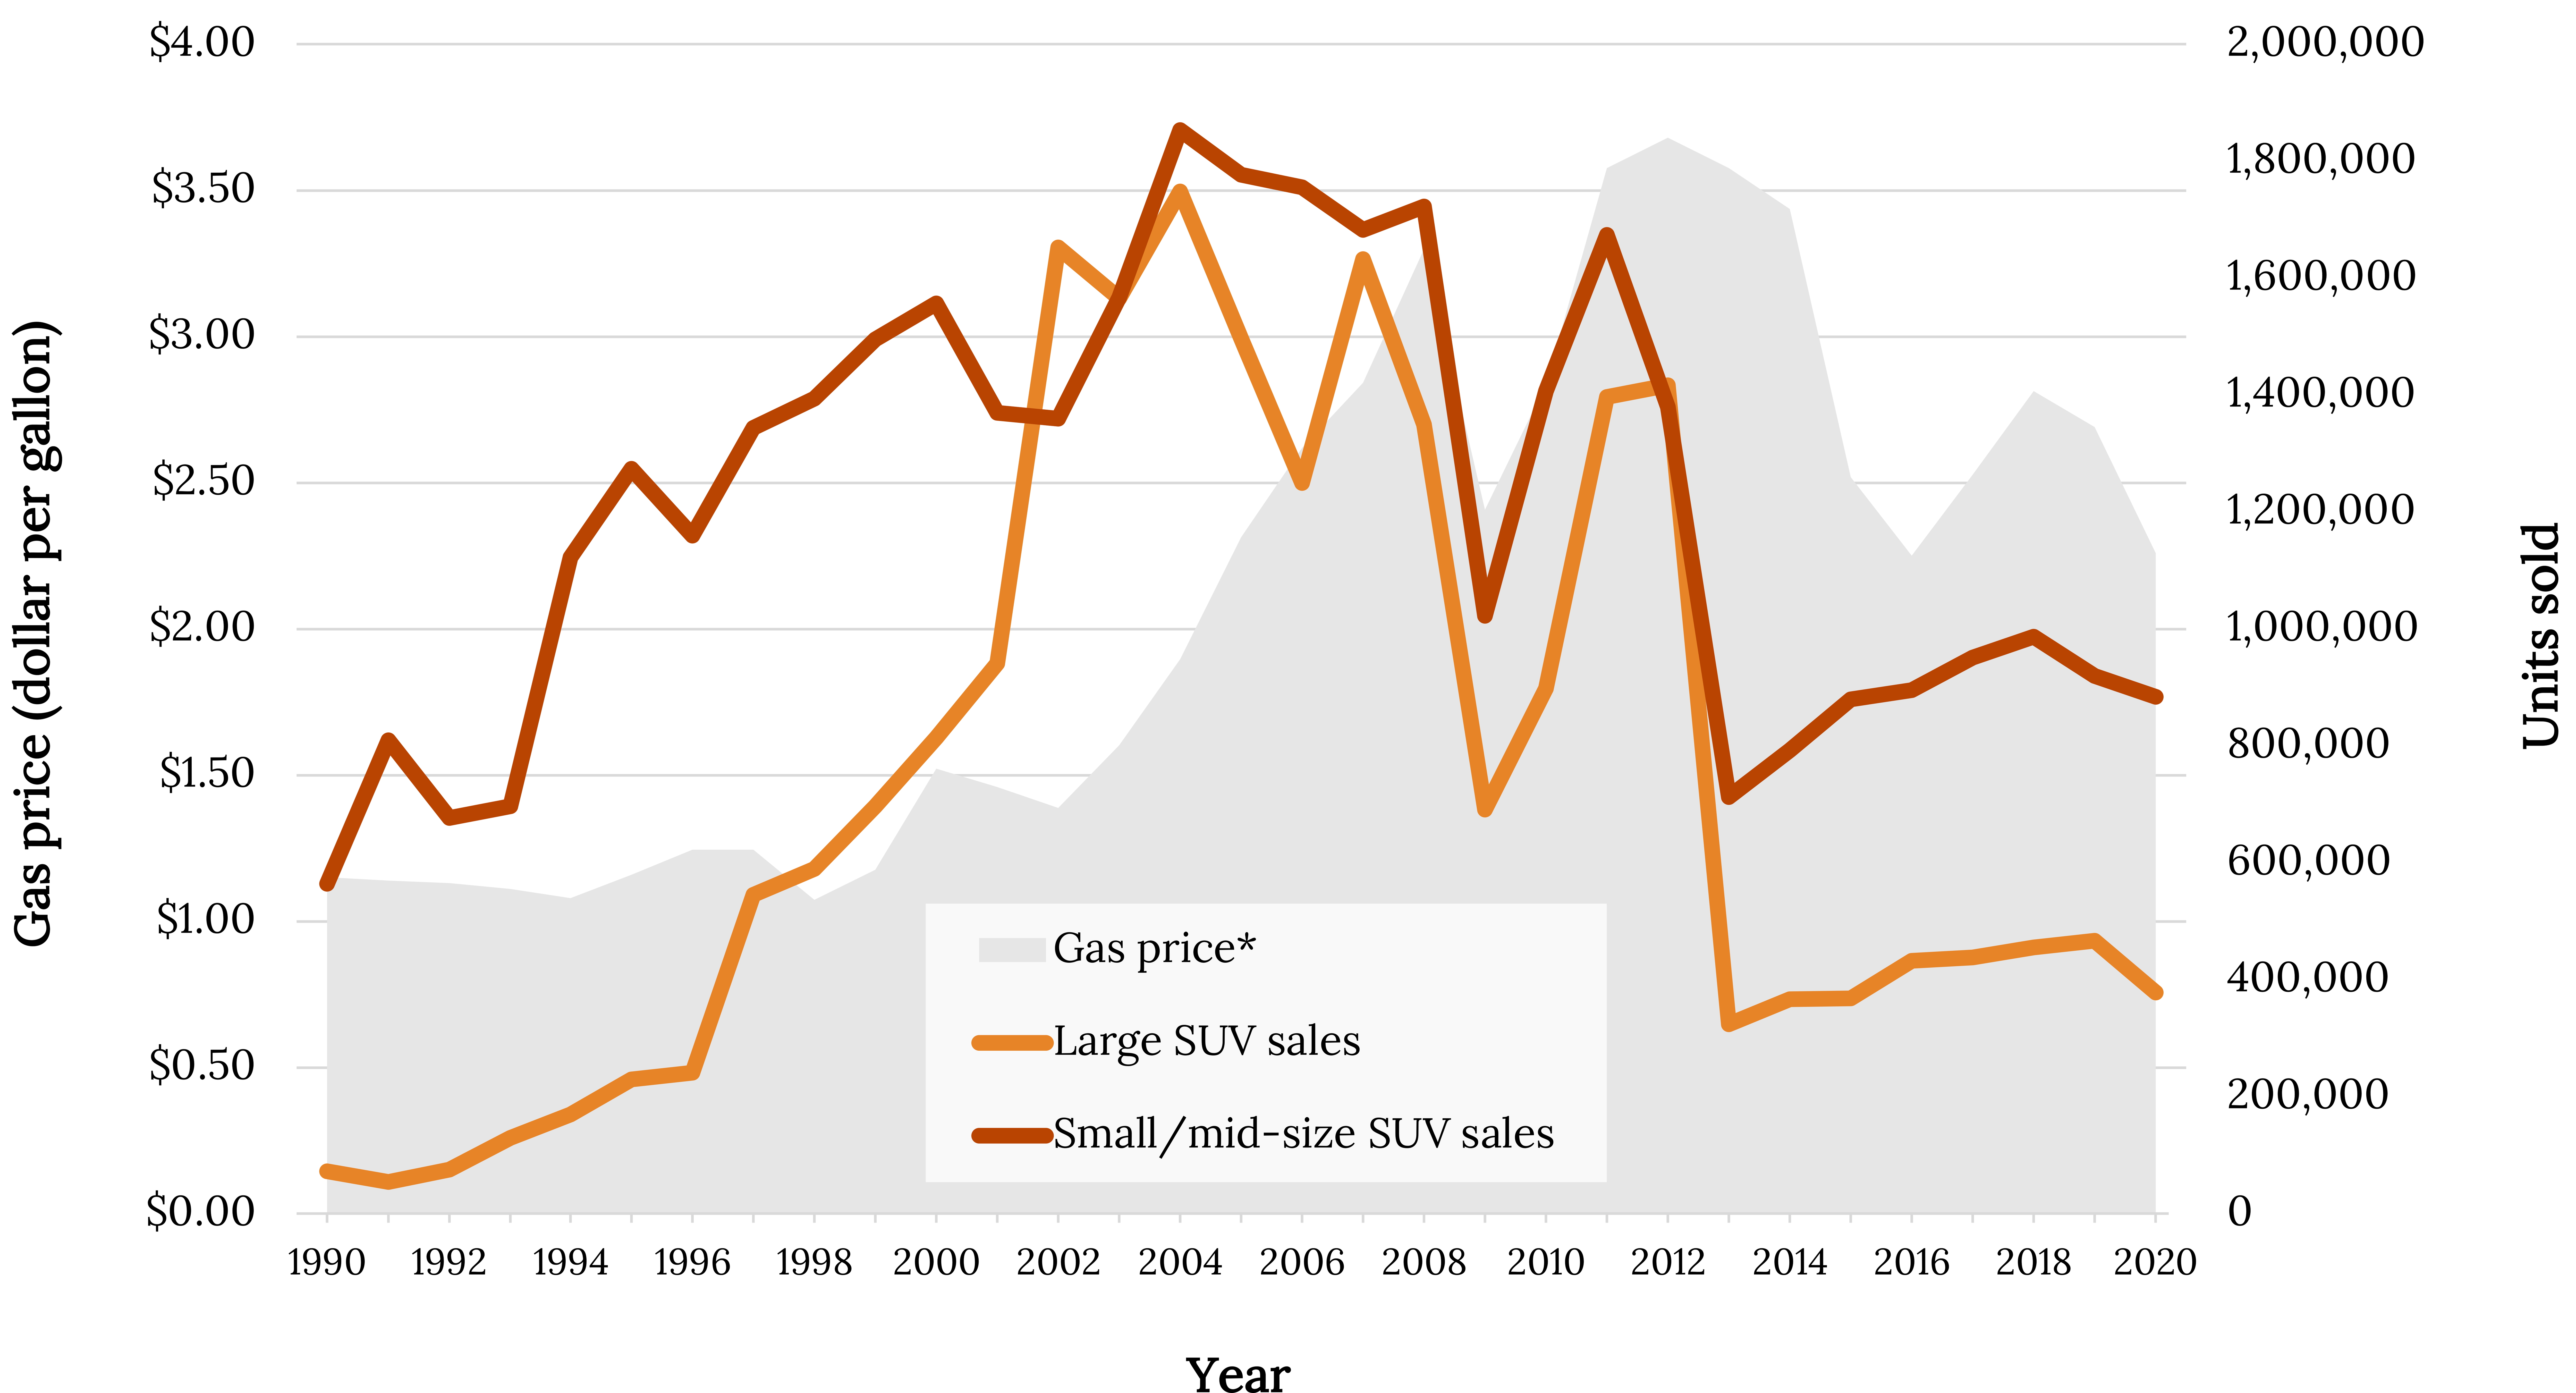 A graph that shows SUV sales by category, along with gas prices per gallon. The x-axis shows years from 1990 to 2019 in 2 year increments. The left y-axis shows units of SUVs sold, in thousands, from 0 to 2 million. The right y-axis shows gas prices in price per gallon from $0 to $3.50 in increments of 50 cents. A maroon line represents Small and Mid-sized SUV sales. It begins at 600 in 1990, and grows gradually to peak above 1,800 in 2004. The line gradually decreases until 2008 to below 1,800, then has a sharp negative decline to 1,000 in 2009. The line increases back up to 1,800 in 2011, then decreases again to 1,500 in 2012. An orange line represents Large SUV sales. It begins near 0 in 1990, then increases gradually to peak at below 1,800. The line drops down to 1,200 in 2006, then back up to 1,600 in 2007, then sharply declines to near 600 in 2009. The line increases to 1,200 until 2012. The area below a jagged grey line is filled and represents gas prices. It begins around $1.25 in 1990, then increases gradually to a peak in 2008 to $3.25. It sharply declines in 2009 to $2.00, then increases to $3.50 in 2012.